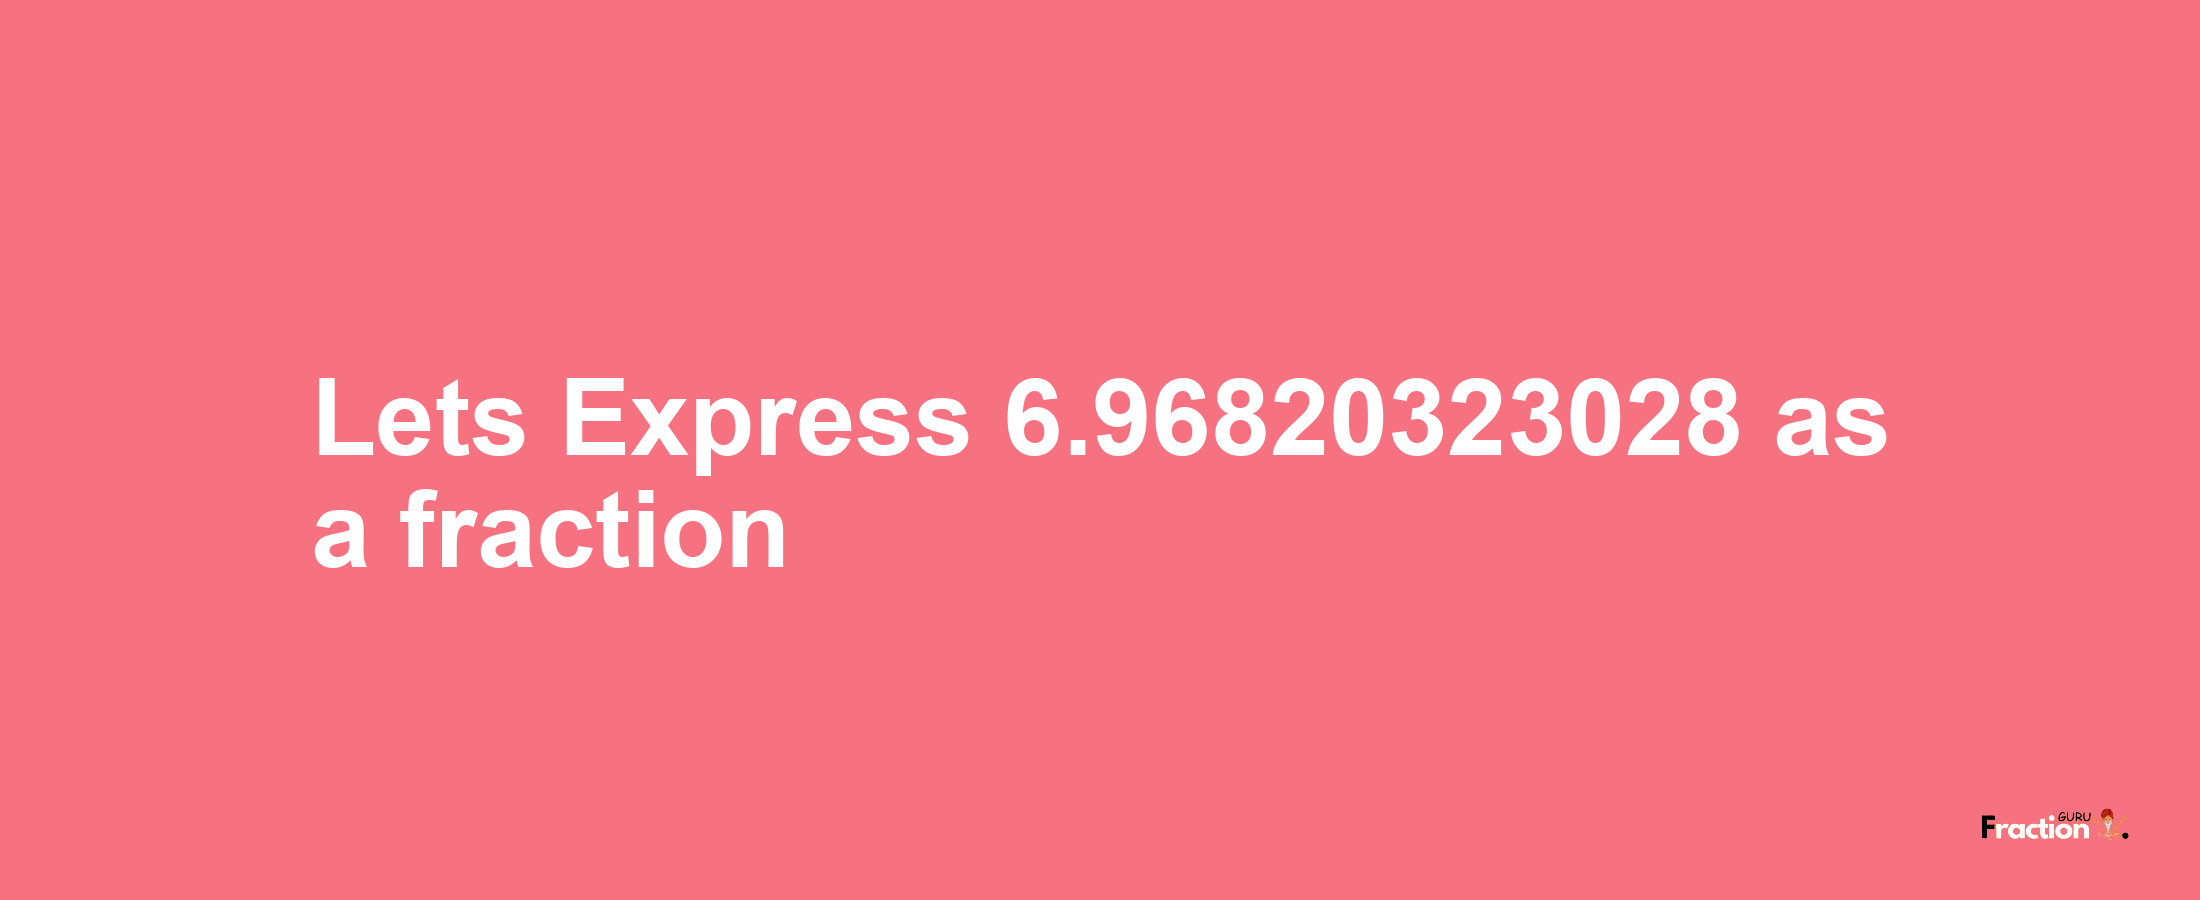 Lets Express 6.96820323028 as afraction